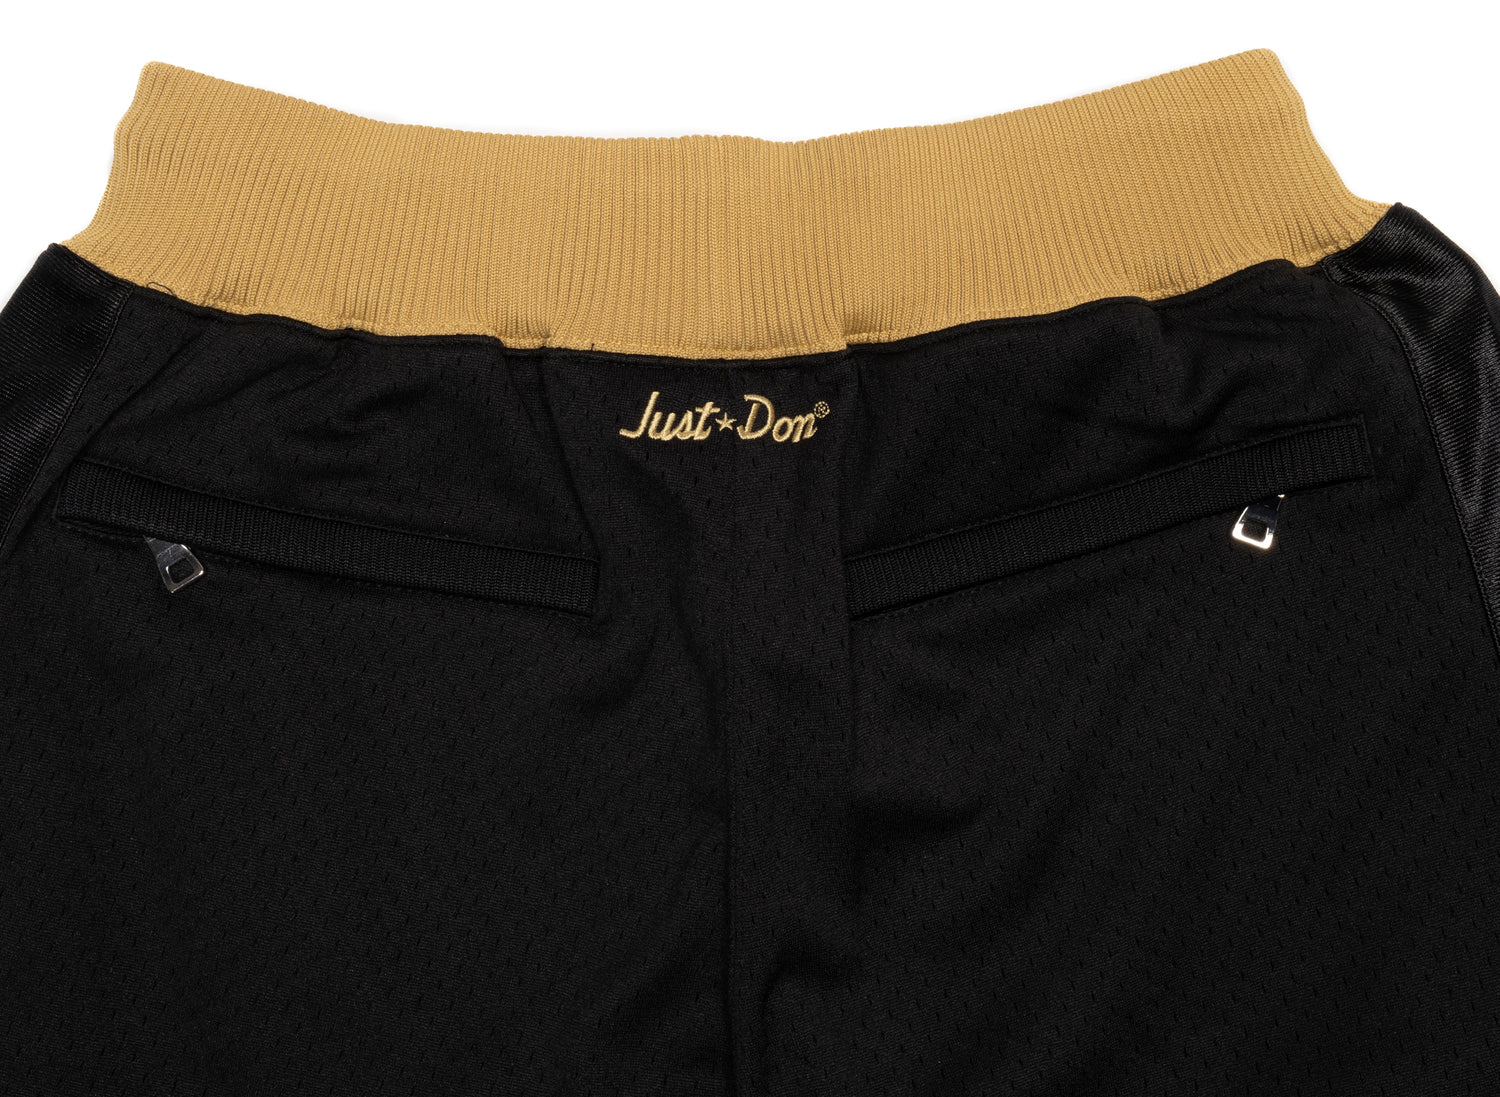 New Wave Of Just Don x Mitchell & Ness Shorts Will Include The